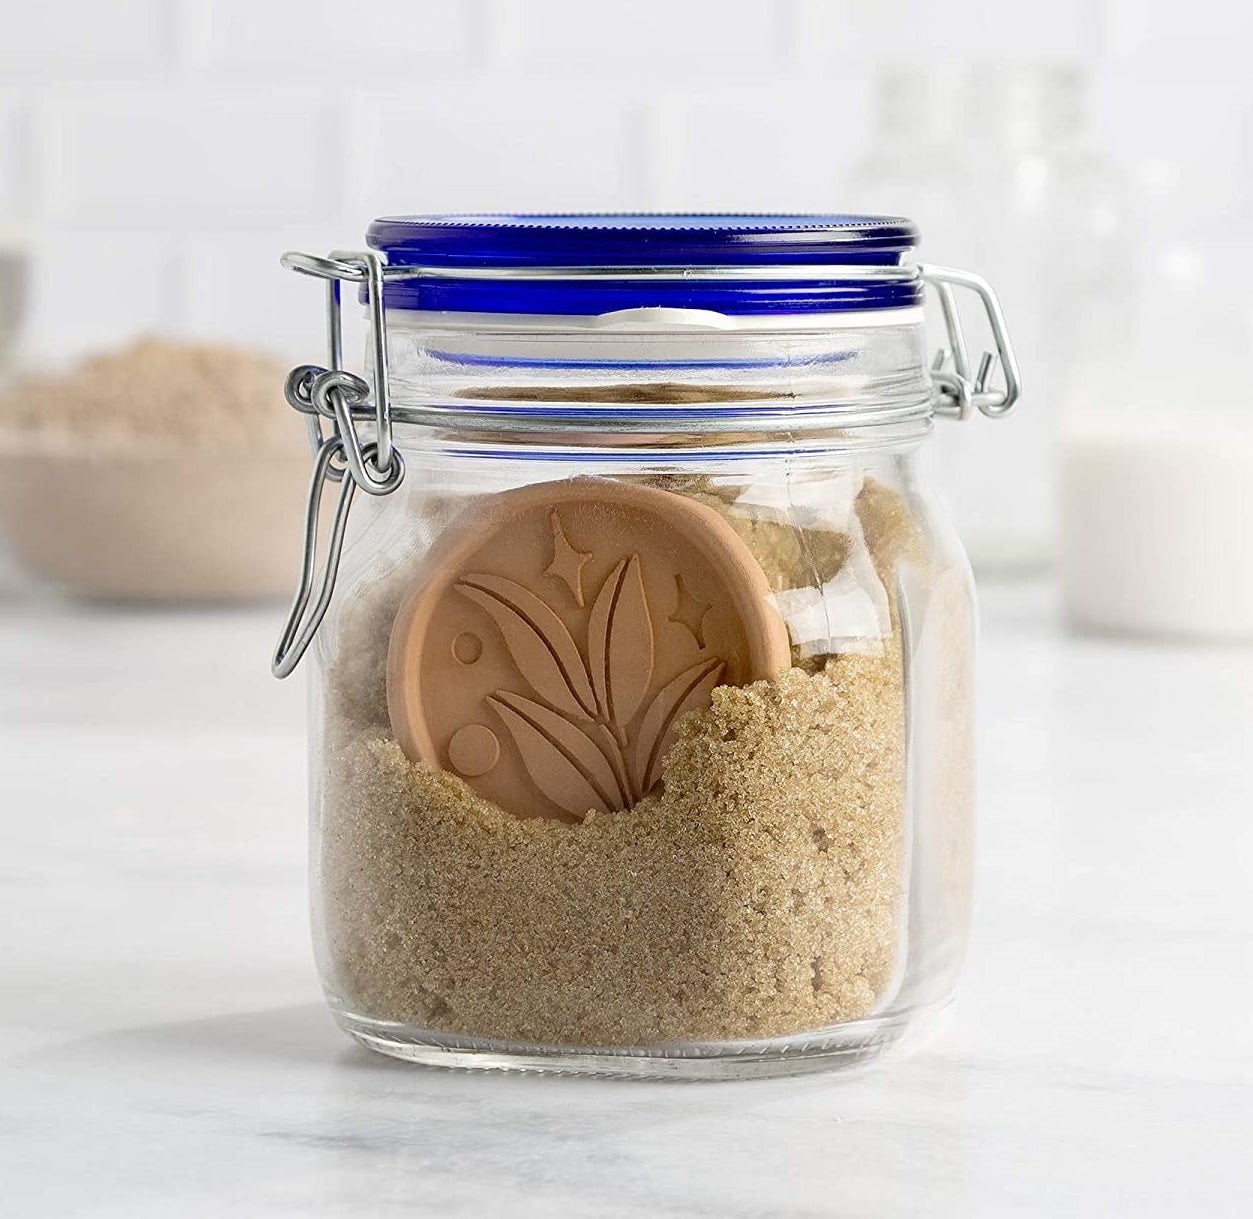 a jar of brown sugar with one of the terracotta discs visible inside